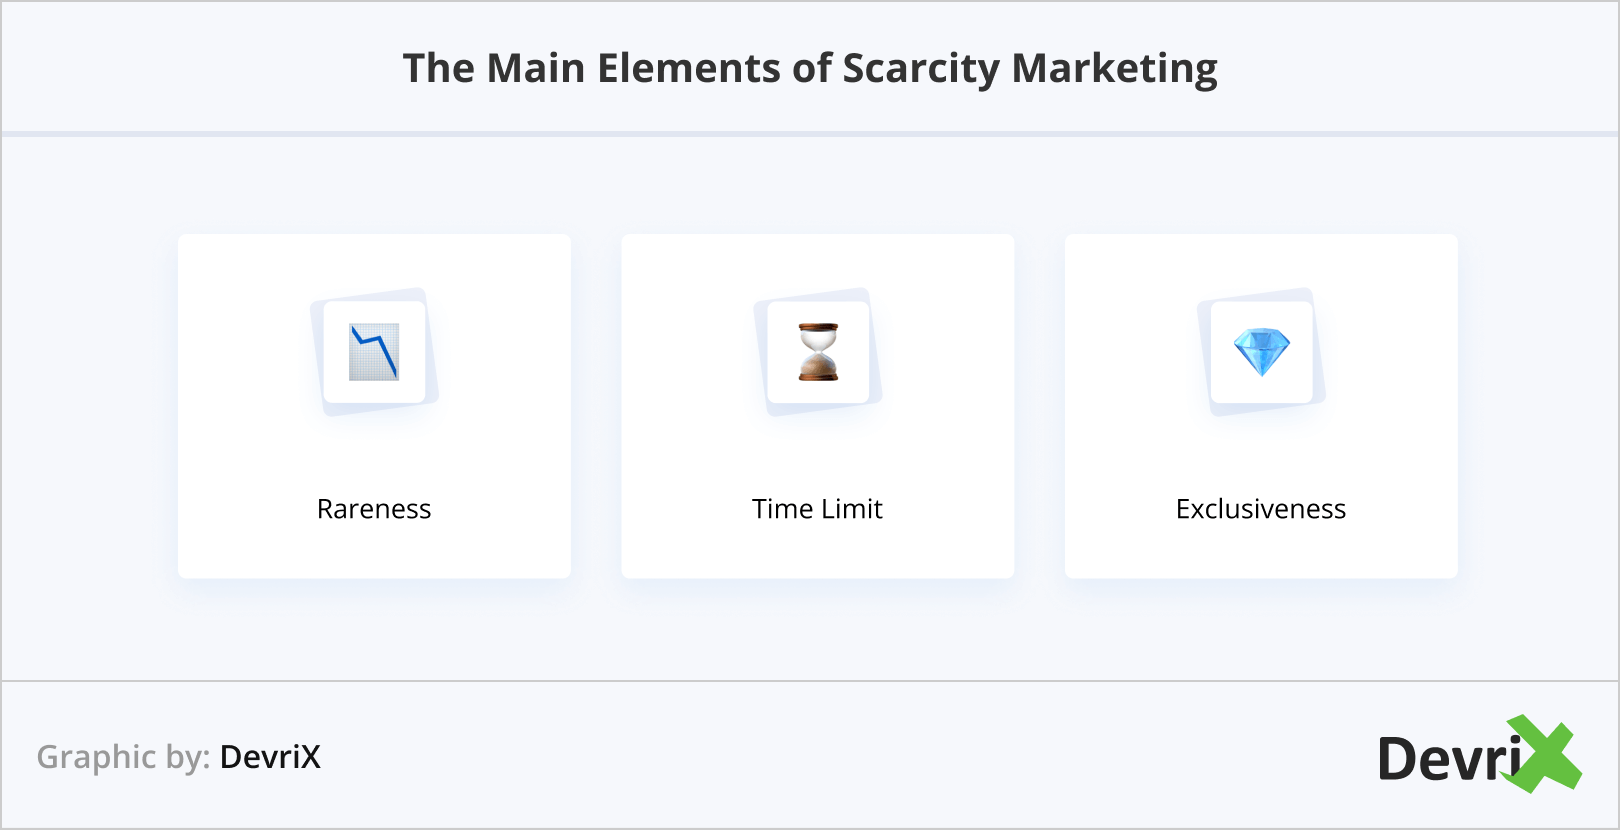 The Main Elements of Scarcity Marketing